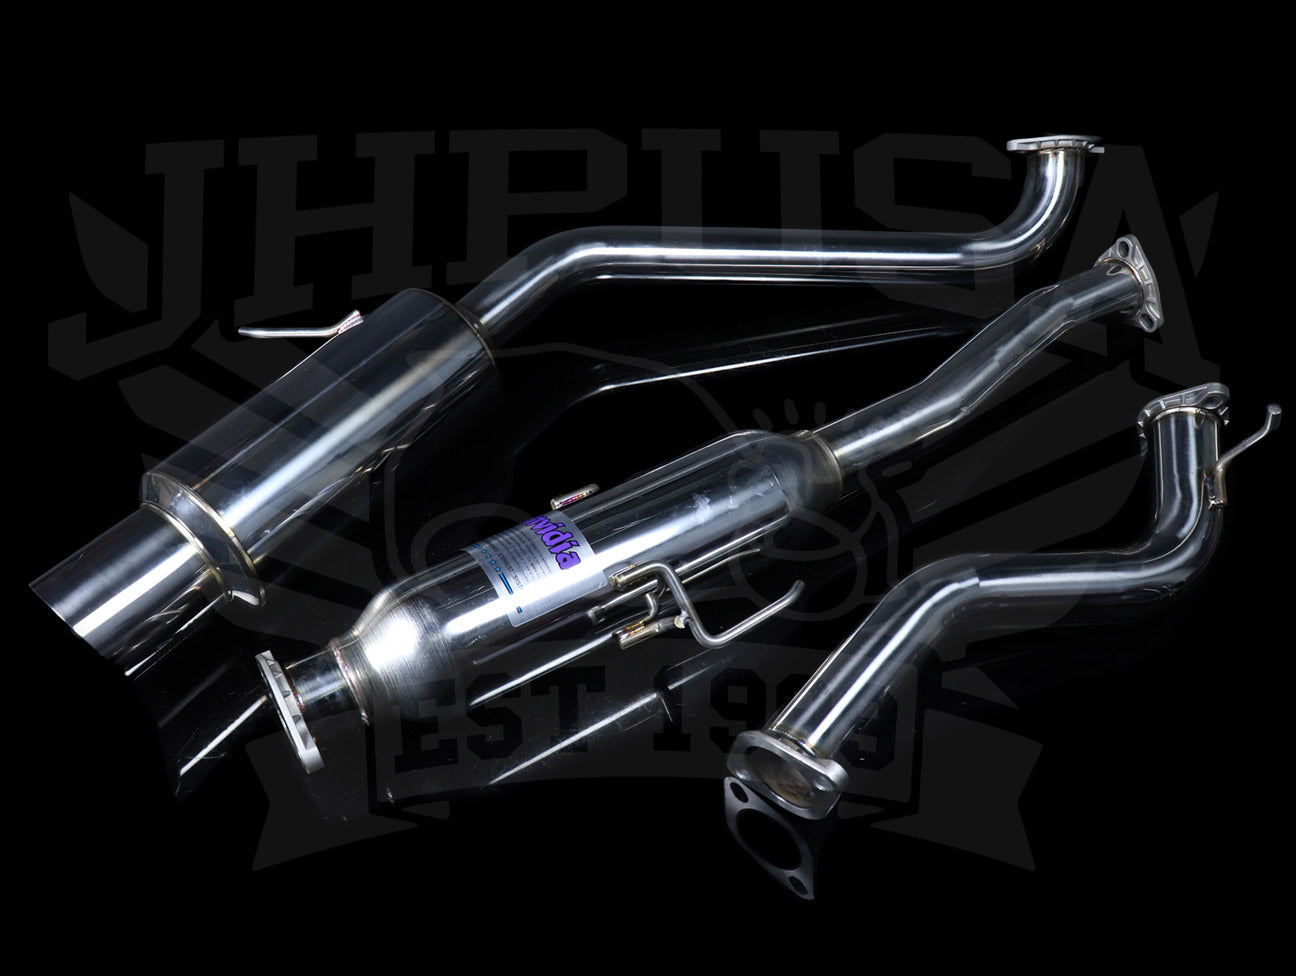 Invidia Cat-Back Exhaust System - 92-96 Prelude